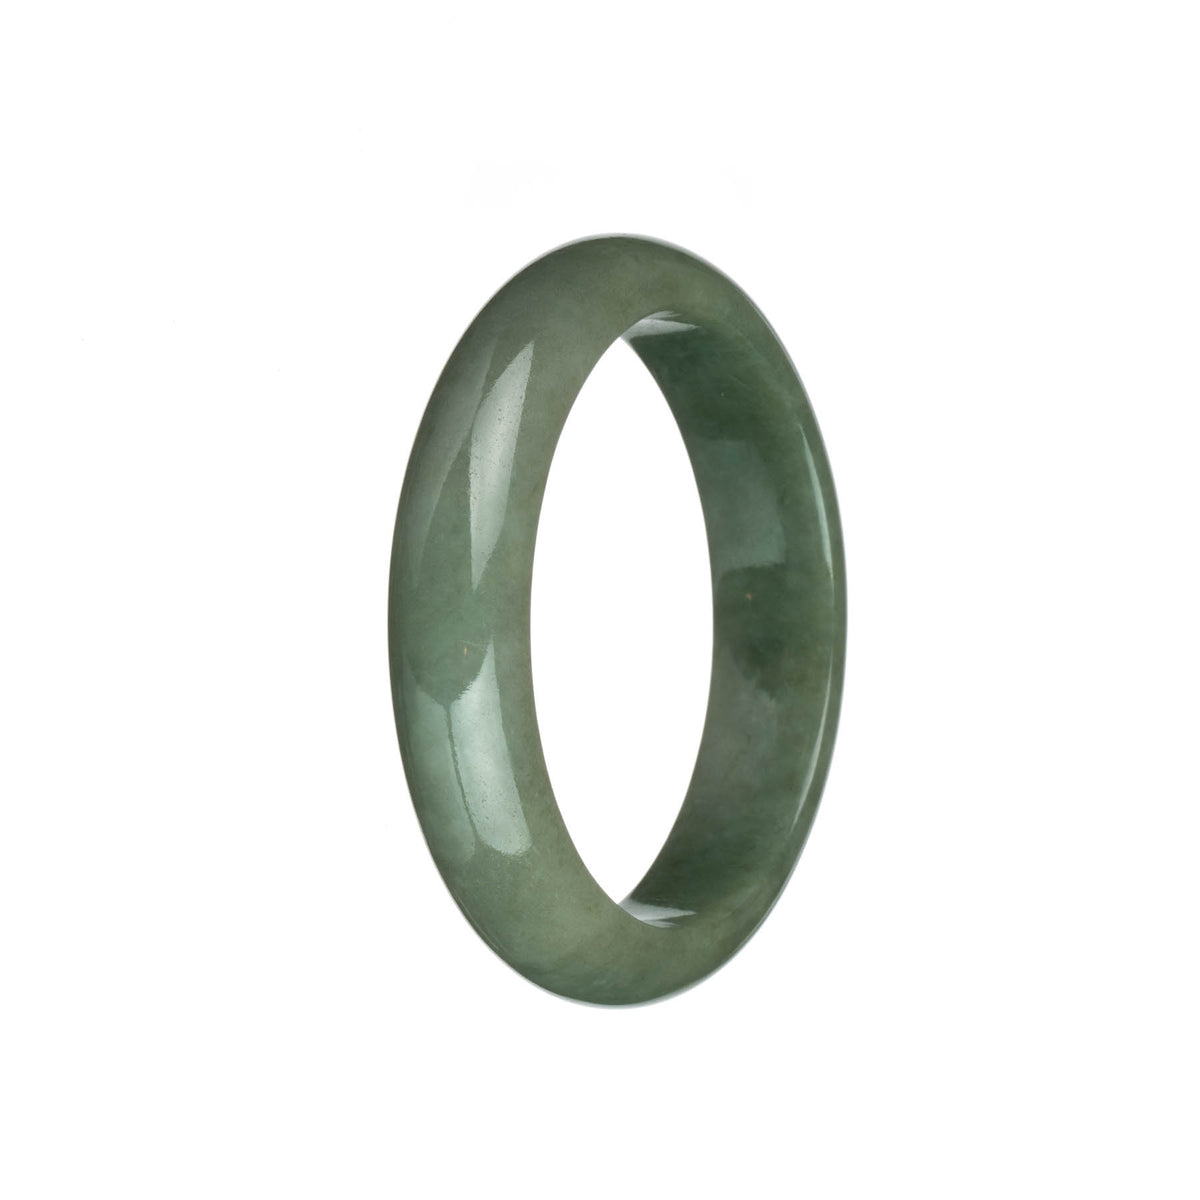 Authentic Type A Olive Green with Light Olive Green Jadeite Jade Bangle Bracelet - 58mm Half Moon